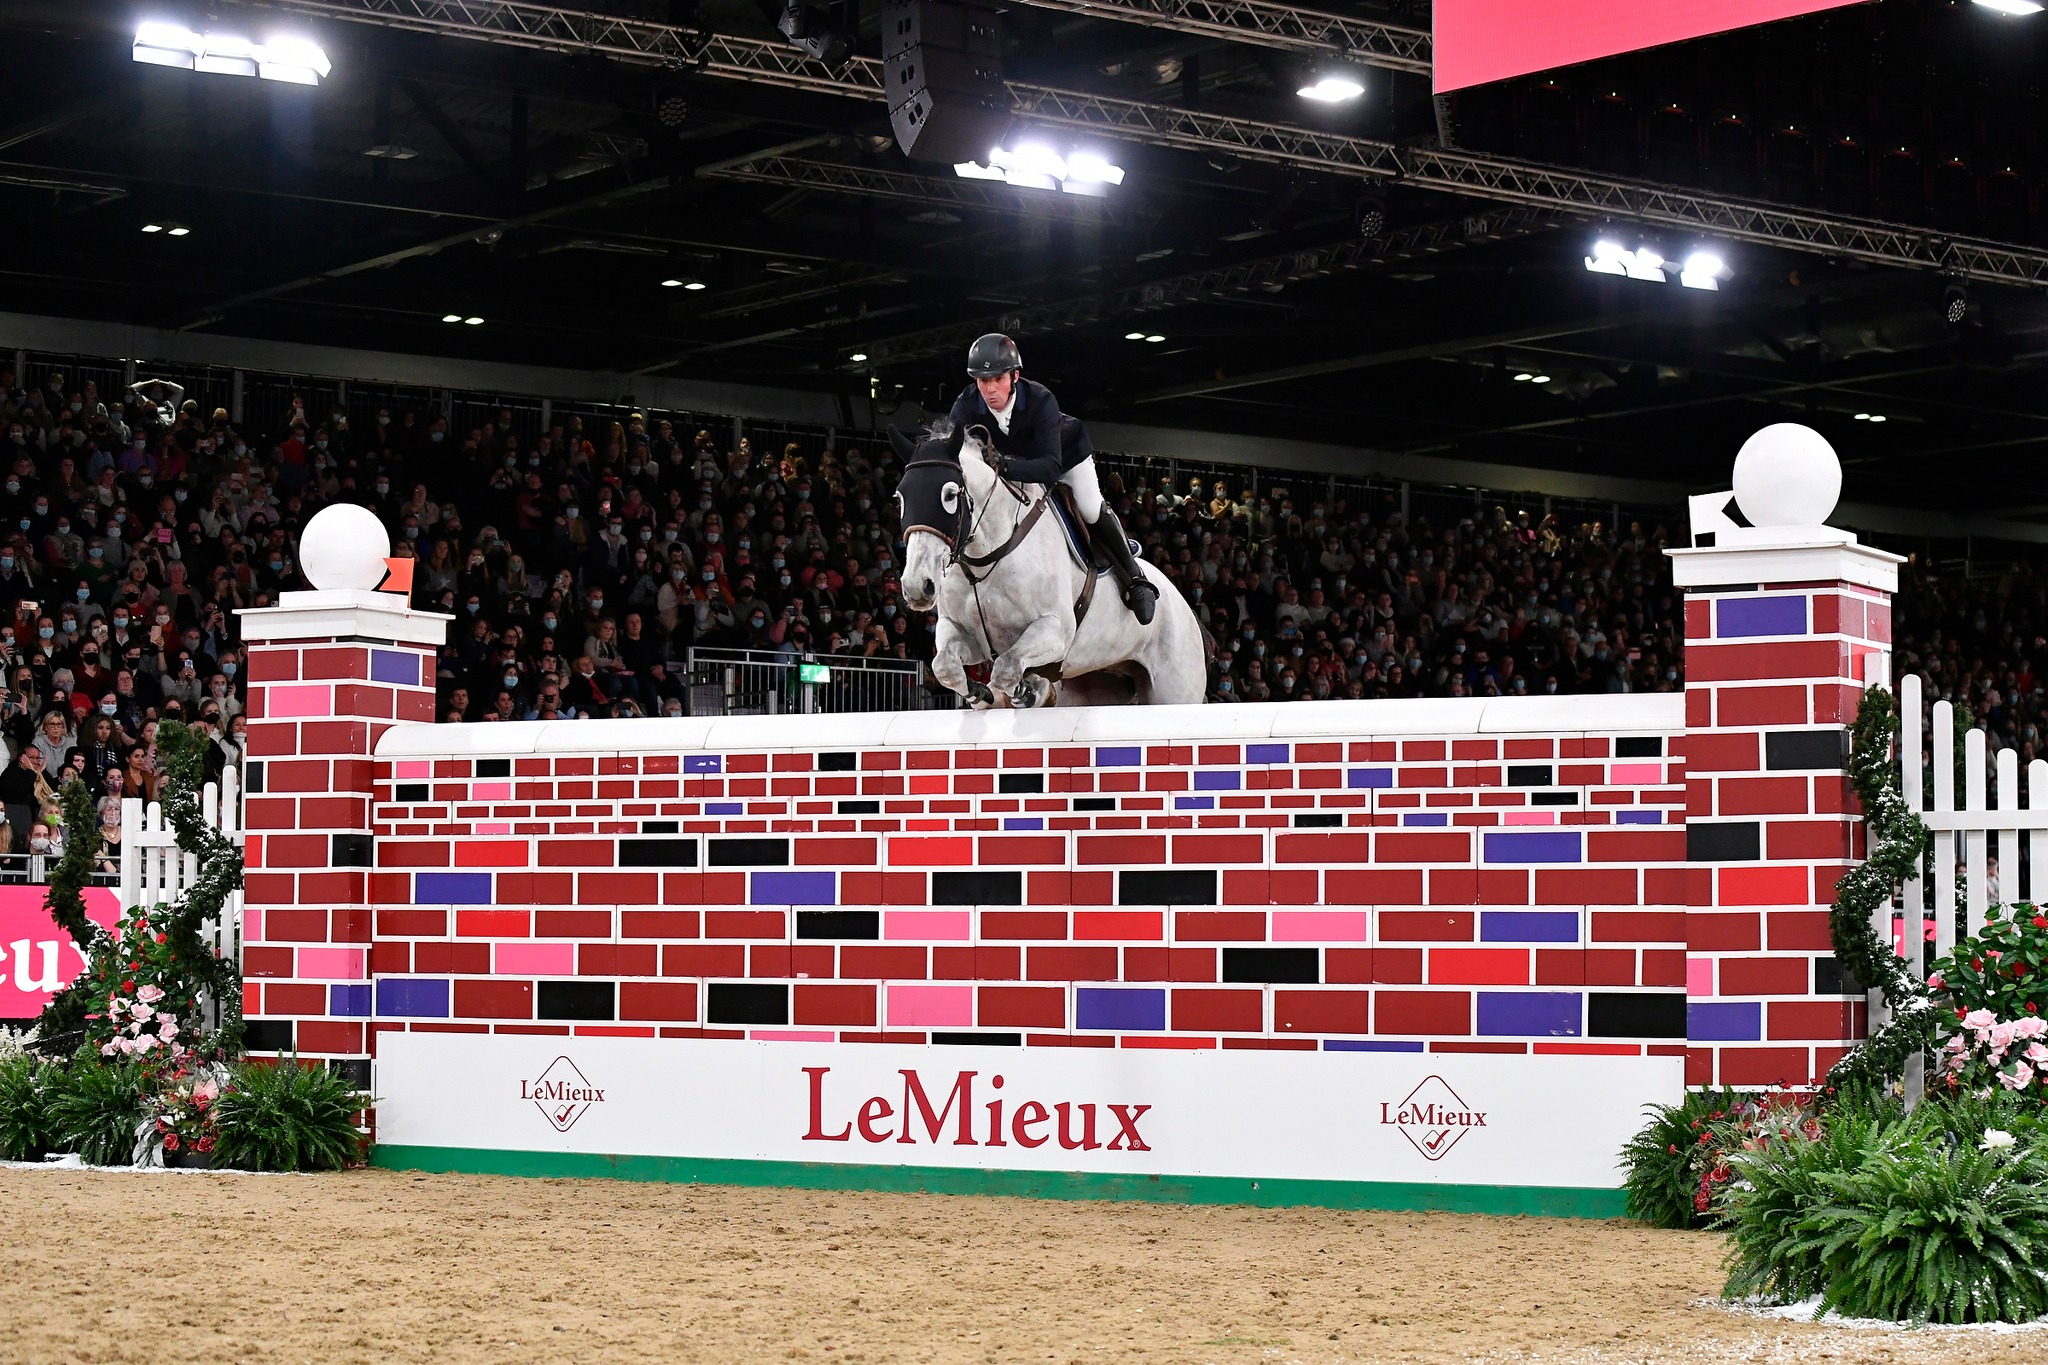 Guy Williams wins the Puissance at The Londen International Horse Show